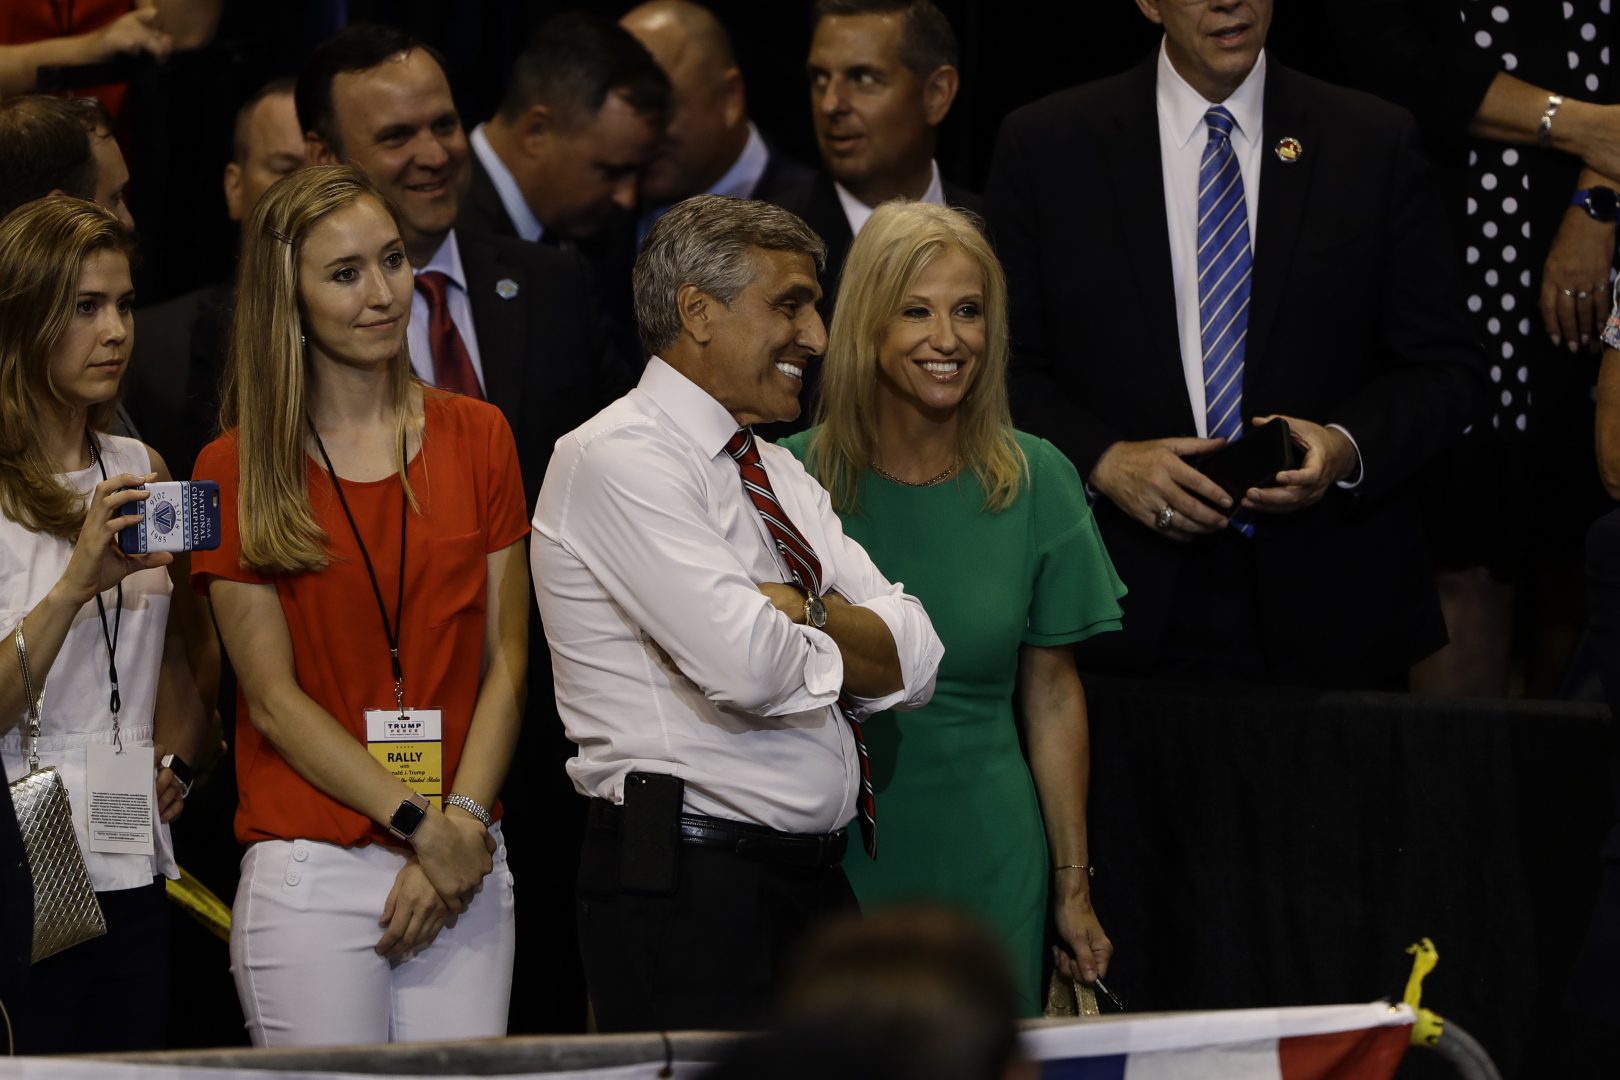 Senate candidate Rep. Lou Barletta, R-Pa., meets with Counselor to the President Kellyanne Conway as President Donald Trump speaks during a rally, Thursday, Aug. 2, 2018, at Mohegan Sun Arena at Casey Plaza in Wilkes Barre, Pa. (AP Photo/Matt Rourke)